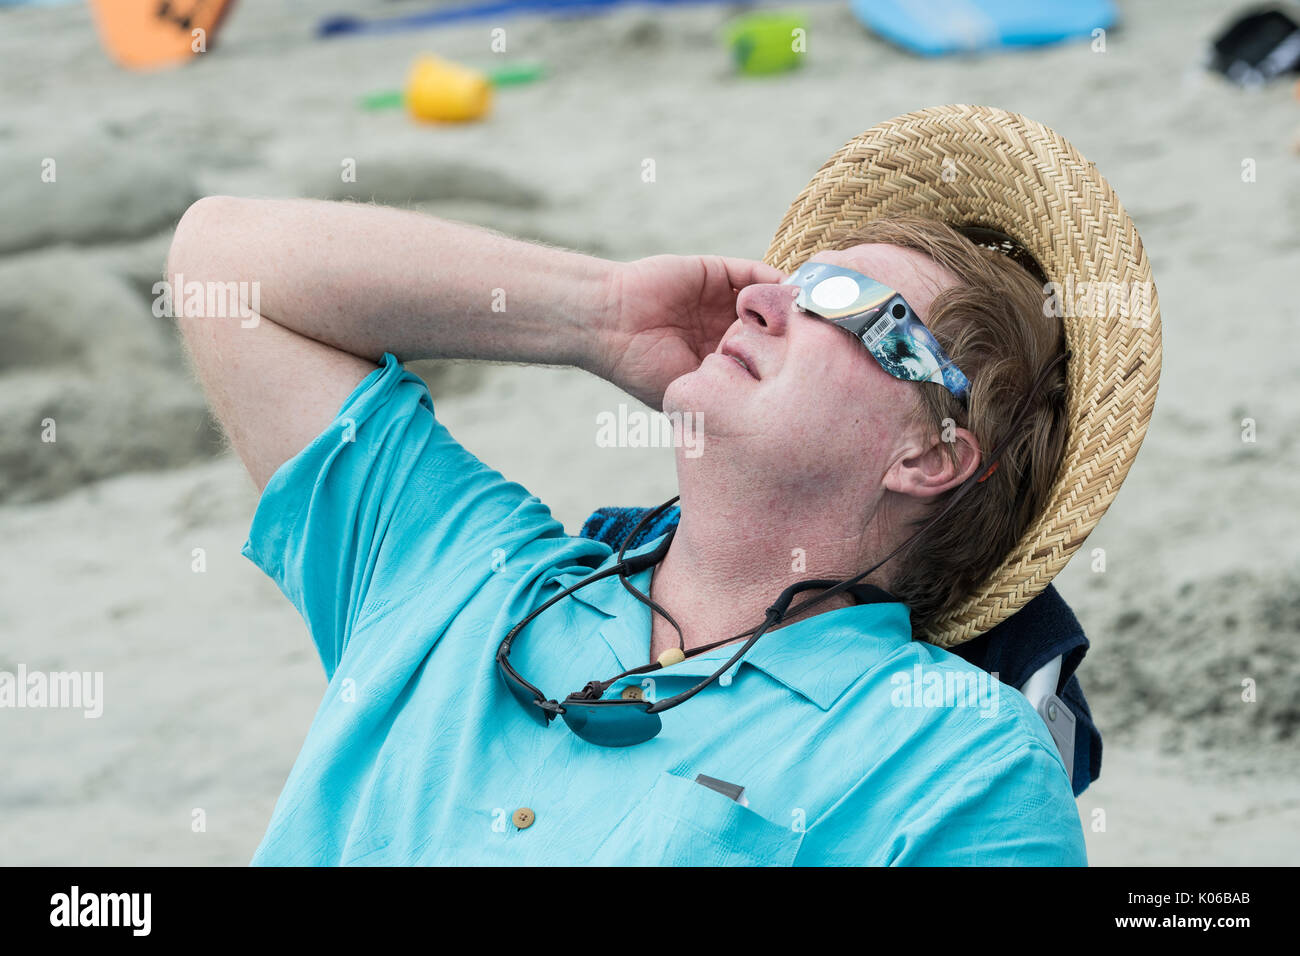 Charleston, Isle of Palms, USA. 21st Aug, 2017. A man relaxes in a beach chair as she view the total solar eclipse over the beach outside Charleston August 21, 2017 in Isle of Palms, South Carolina. The solar eclipse after sweeping across the nation crosses the Charleston area before heading over the Atlantic Ocean. Credit: Planetpix/Alamy Live News Stock Photo